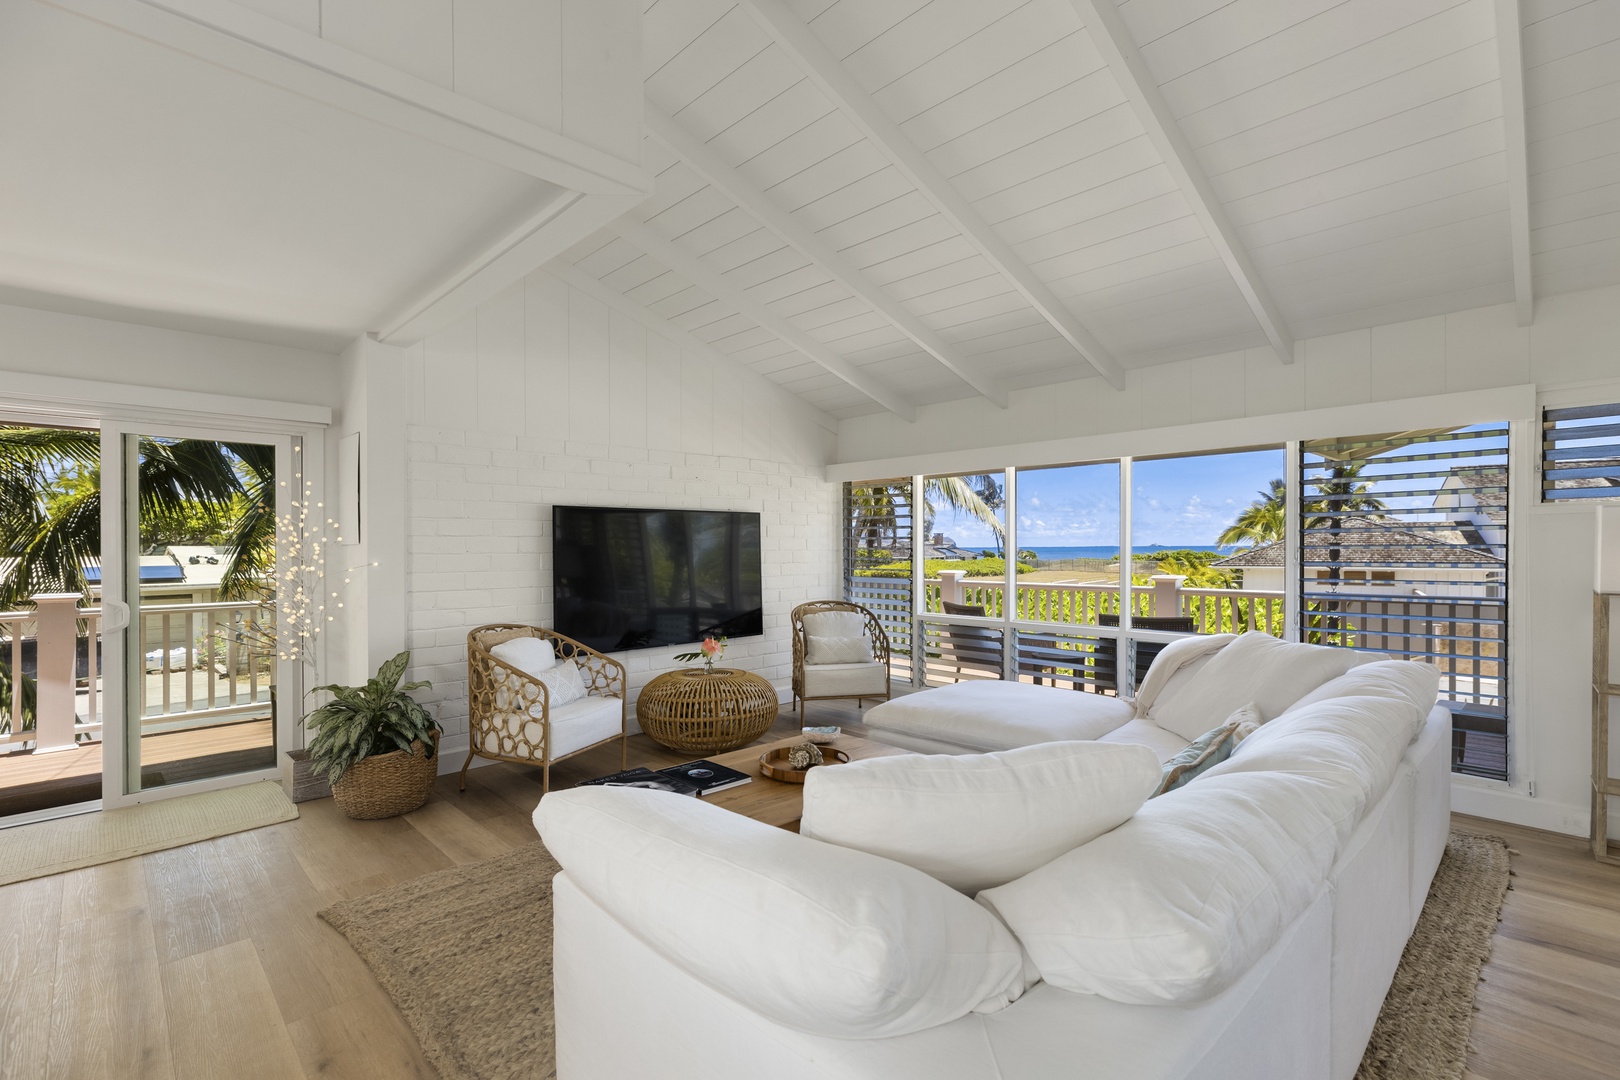 Kailua Vacation Rentals, Ranch Beach Estate - Front House Living Room with Ocean Views